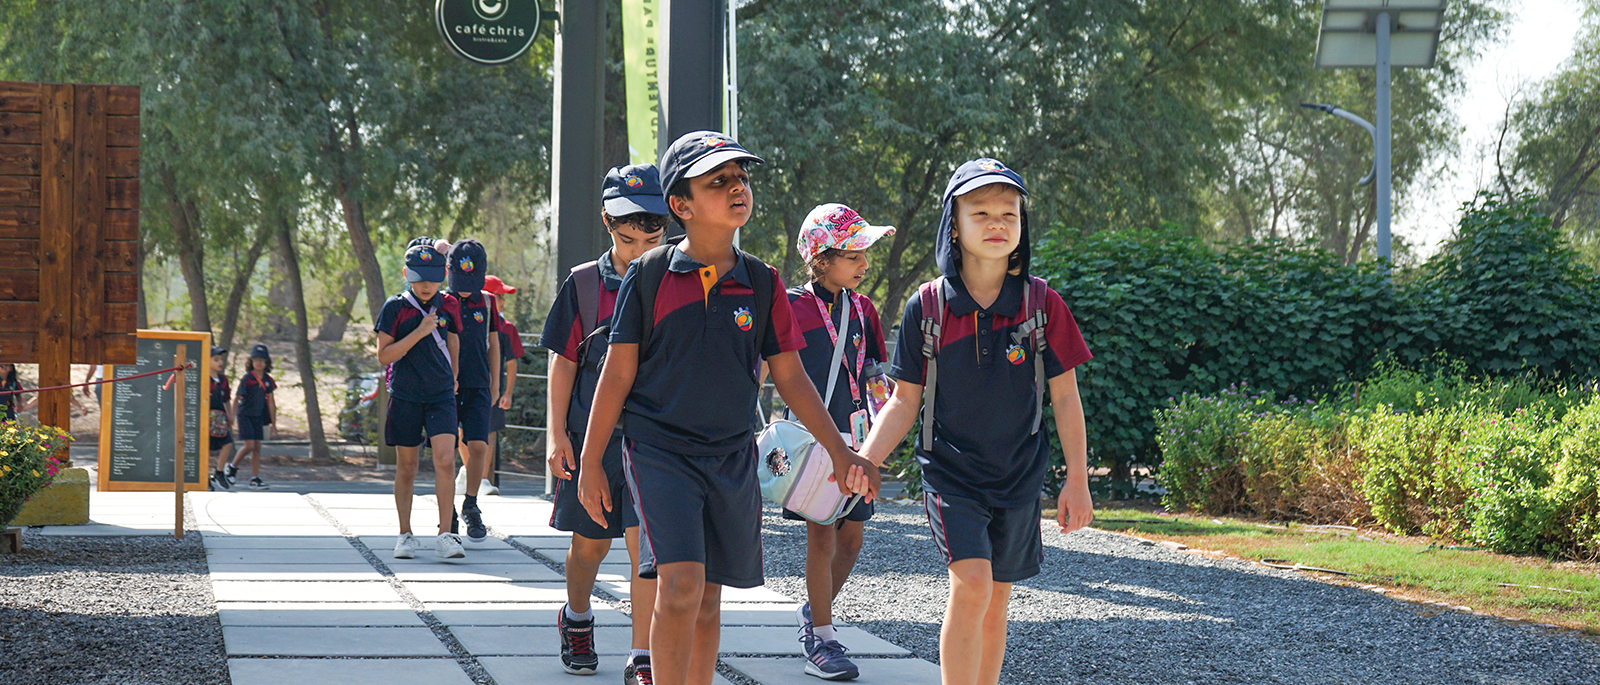 School Field Trips at Aventura Parks - Let Nature Be Your Classroom